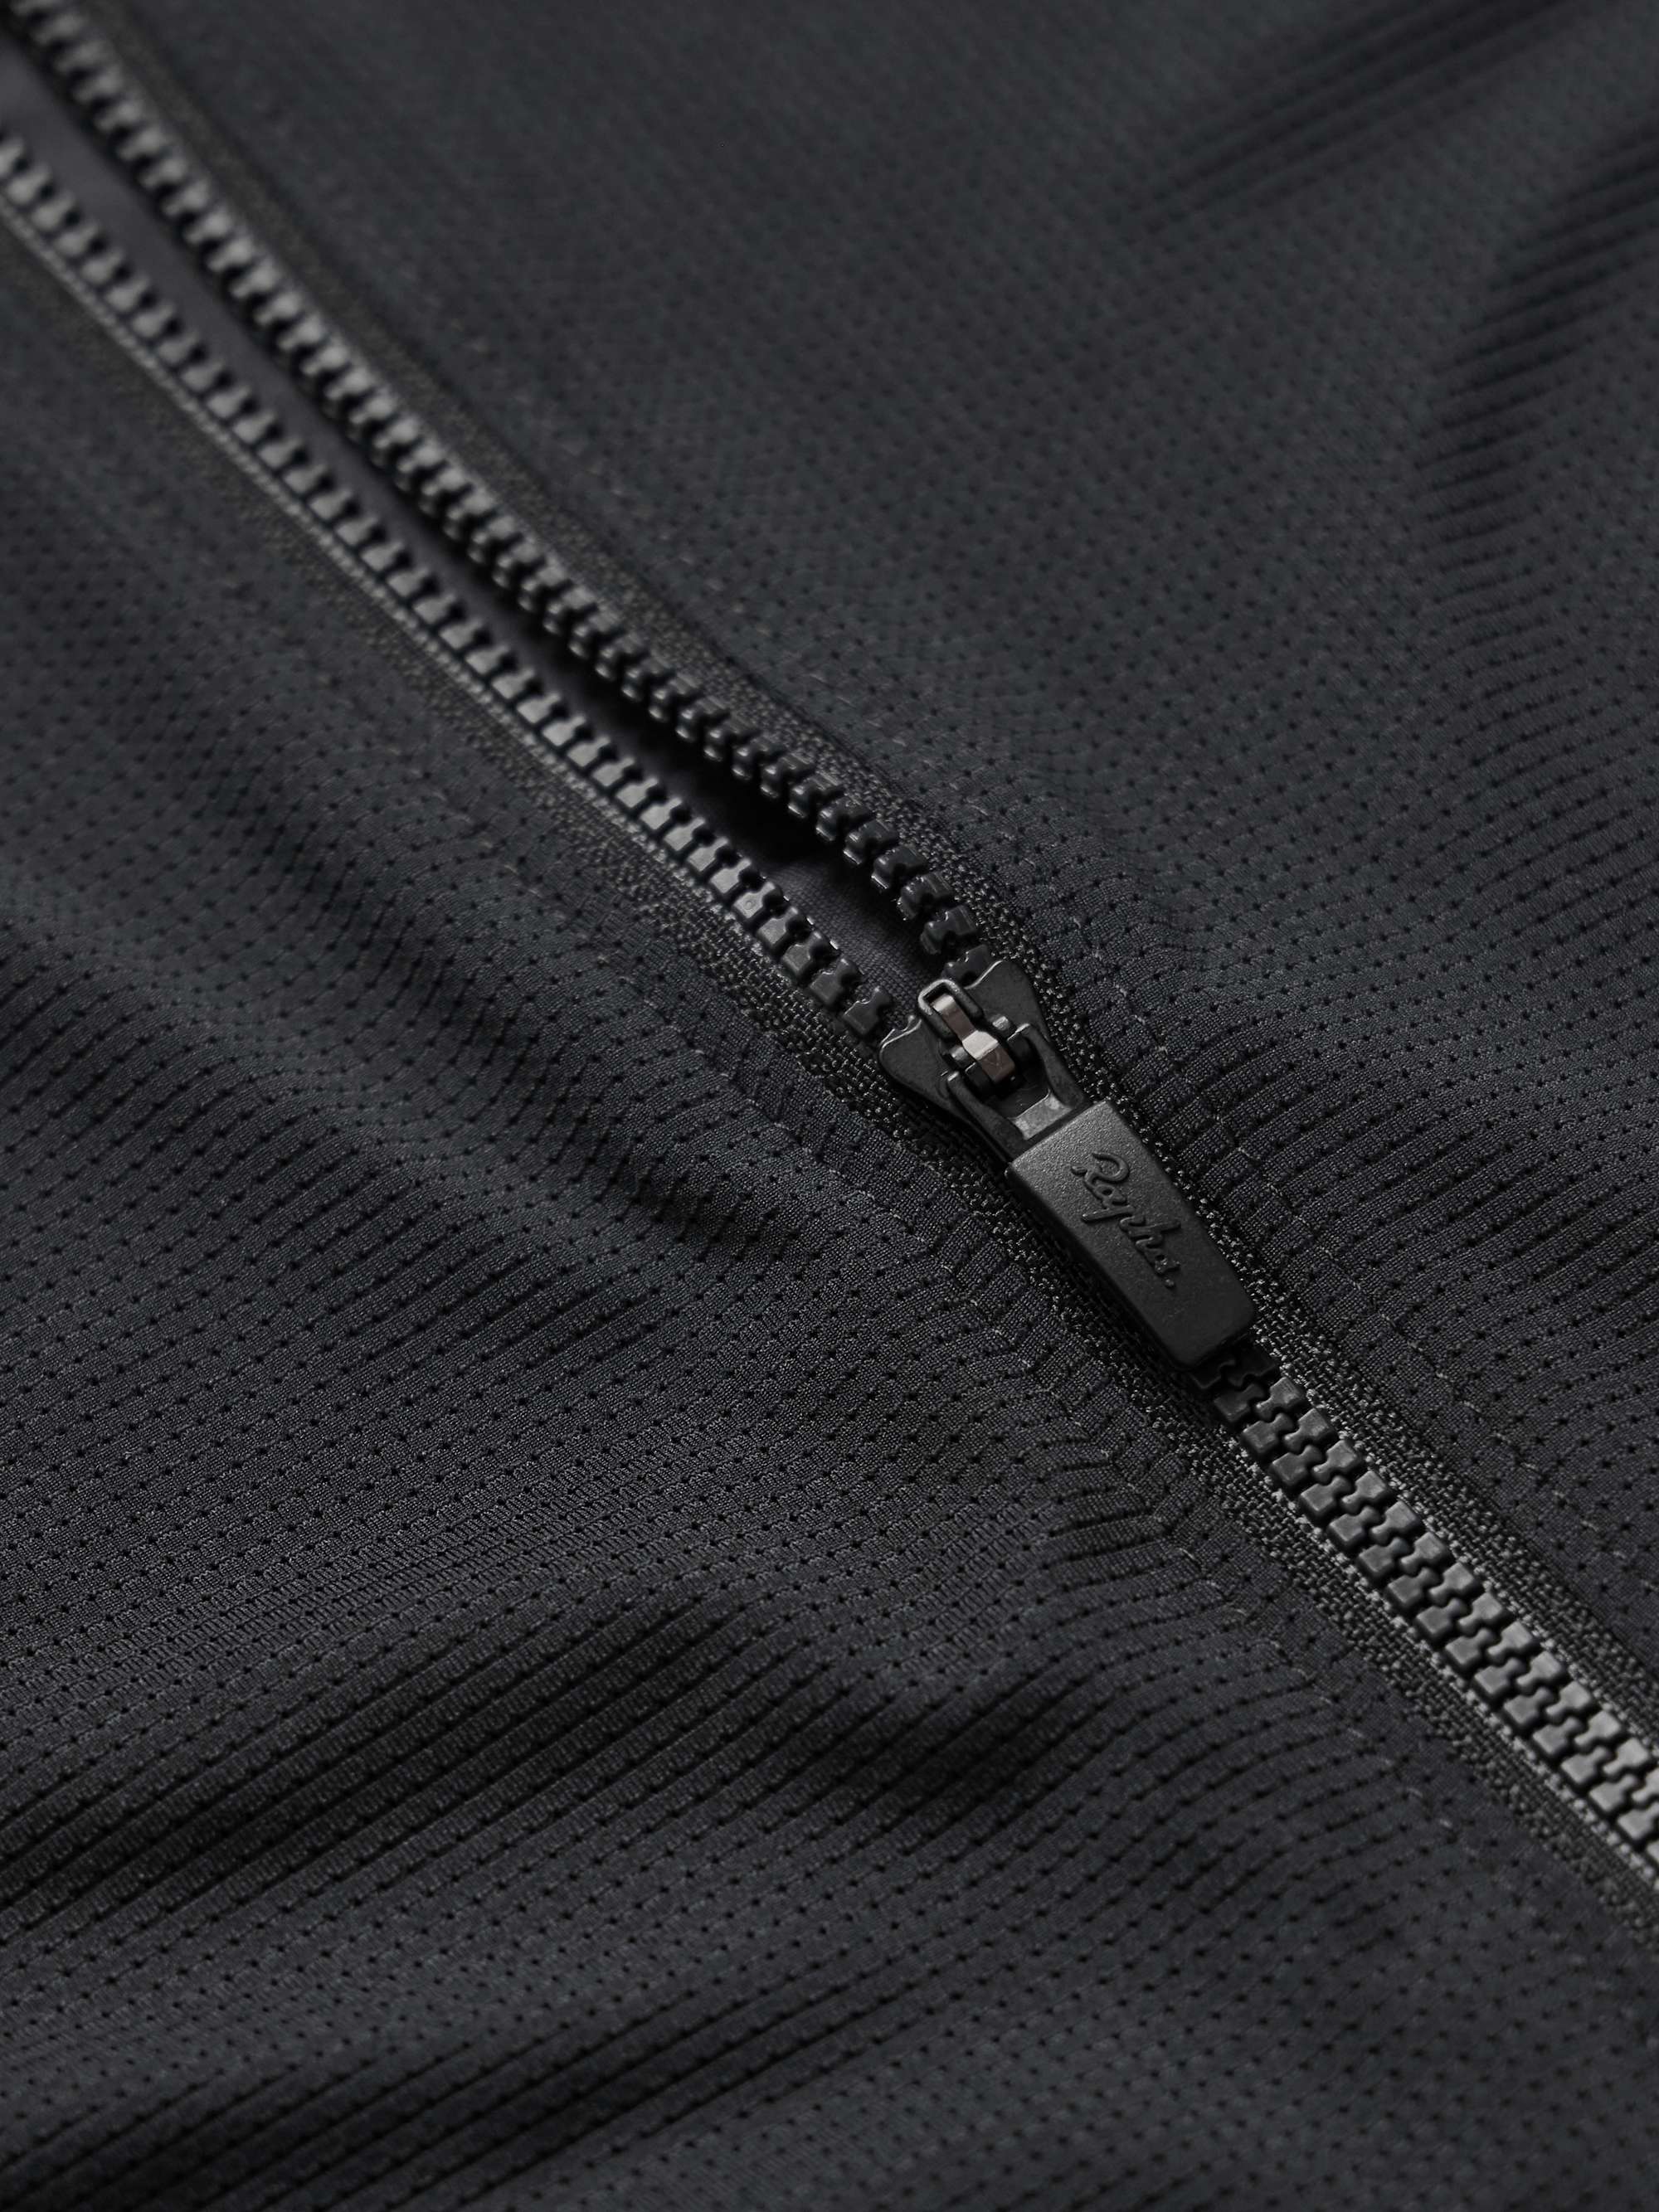 RAPHA Pro Team Mesh-Panelled Stretch Cycling Jersey